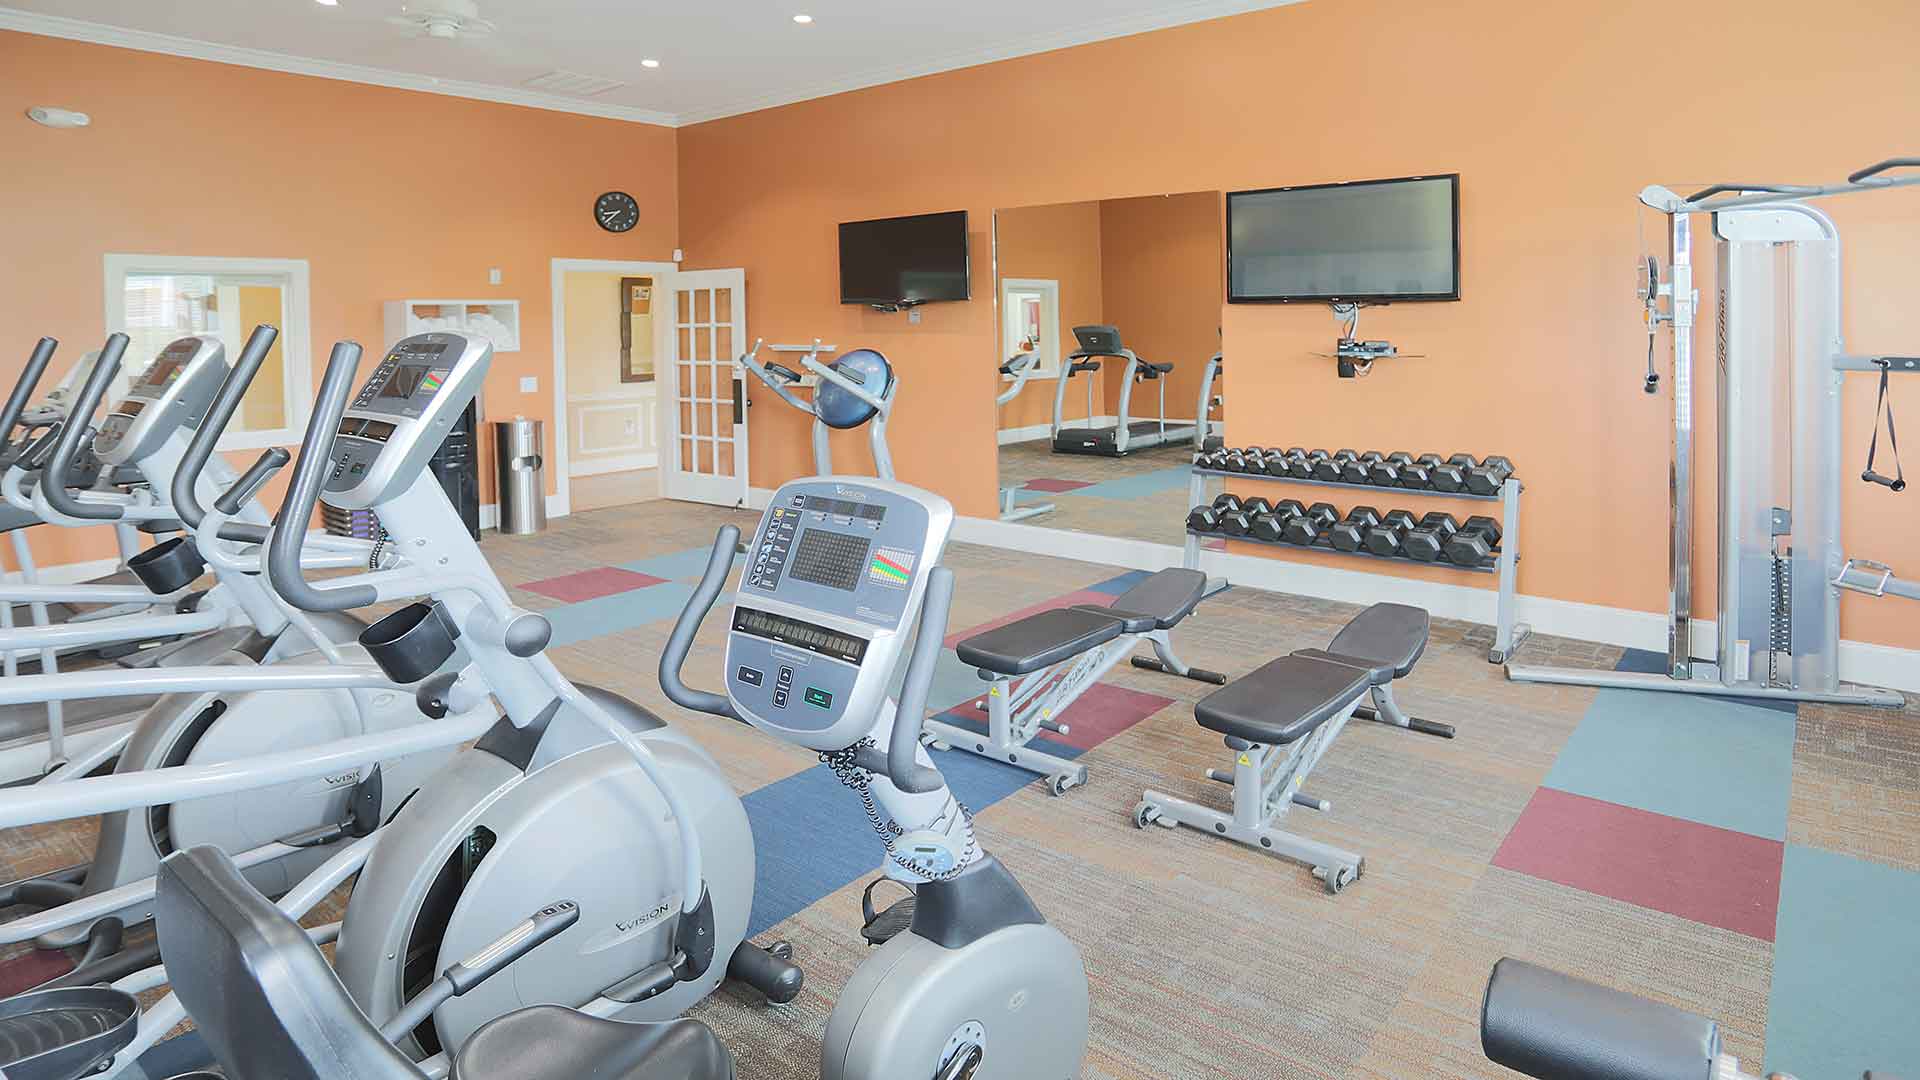 Fitness room with cardio machines and dumbbells.